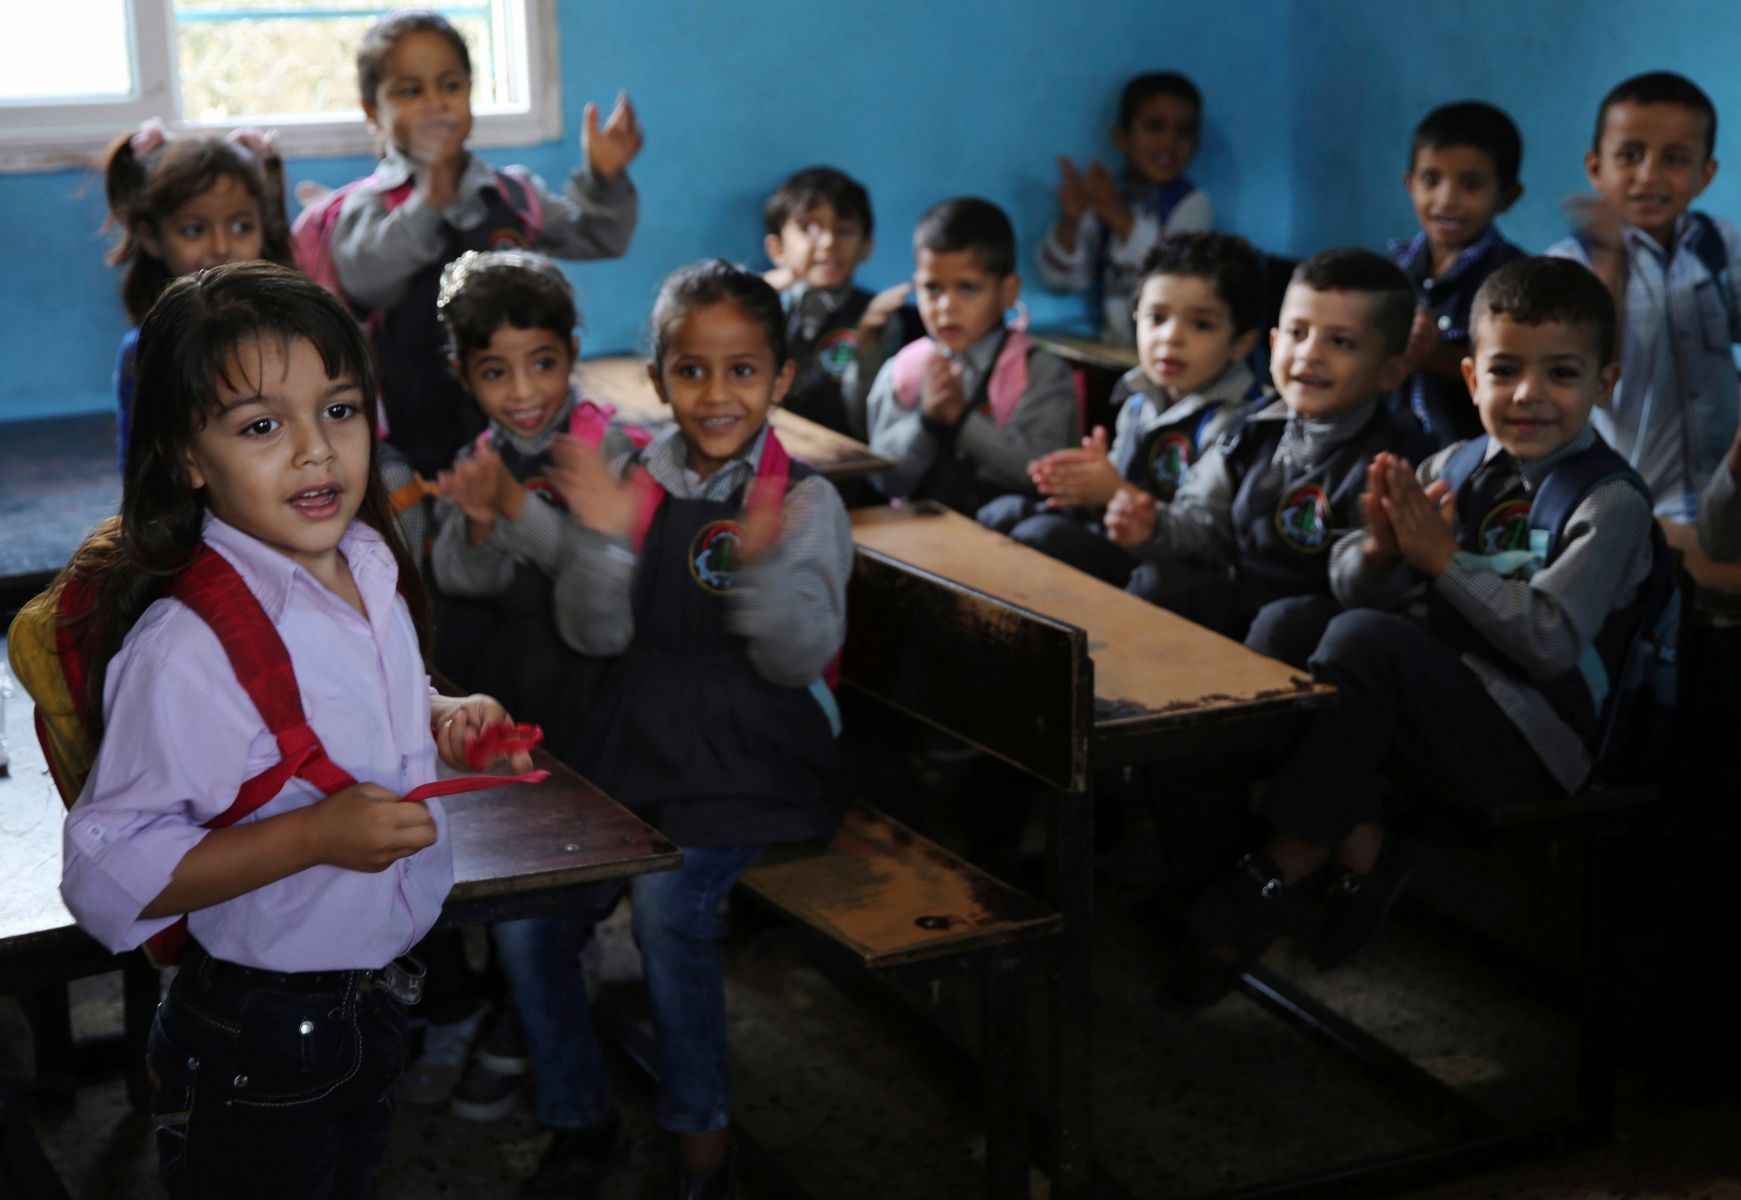 In this Oct. 31, 2016 photo, Abdel Ghani al-Attar, left, recites poetry to his classmates at a kindergarten in Rafah, Gaza. Like millions of Syrians, the al-Attar family fled the civil war in his homeland in search of safety and security, but in a decision they now regret, they chose to go to Gaza. Their family is among 12 Syrian households that found refuge in Gaza after the civil war erupted in 2011 and are now trapped in the war-battered territory, but also unable to travel abroad. (AP Photo/Adel Hana) Mideast Palestinians Syrians in Gaza